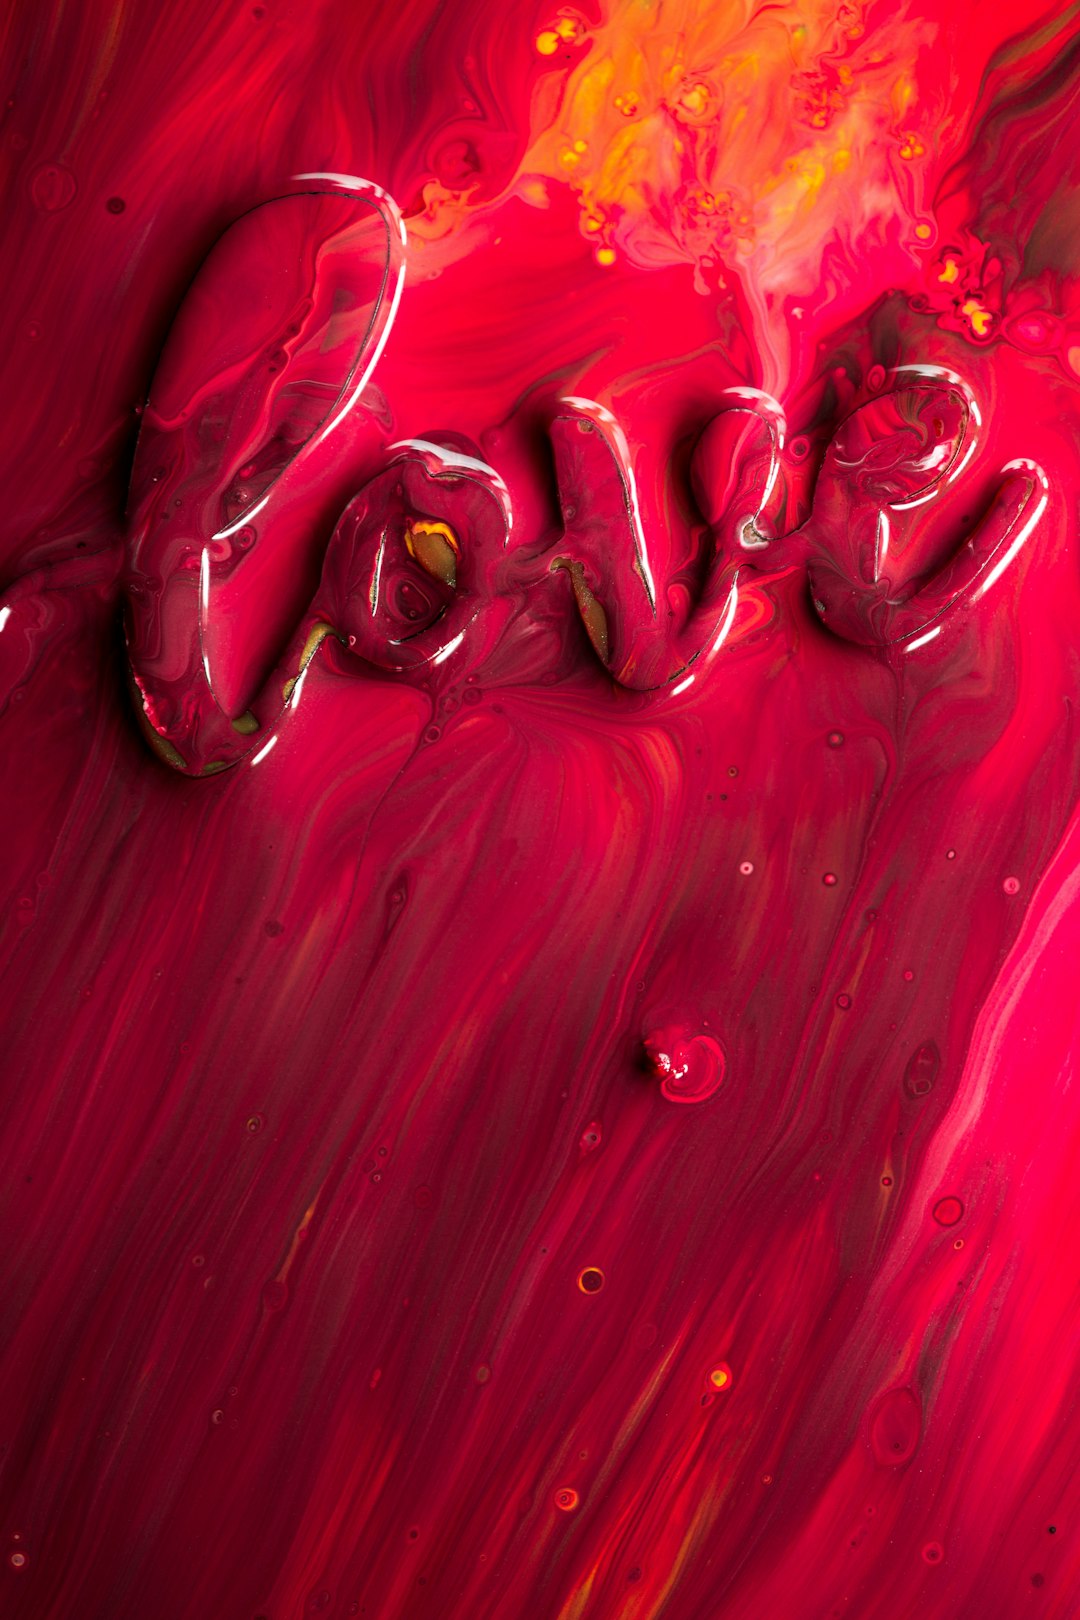 love painted in reds, yellows and pinks